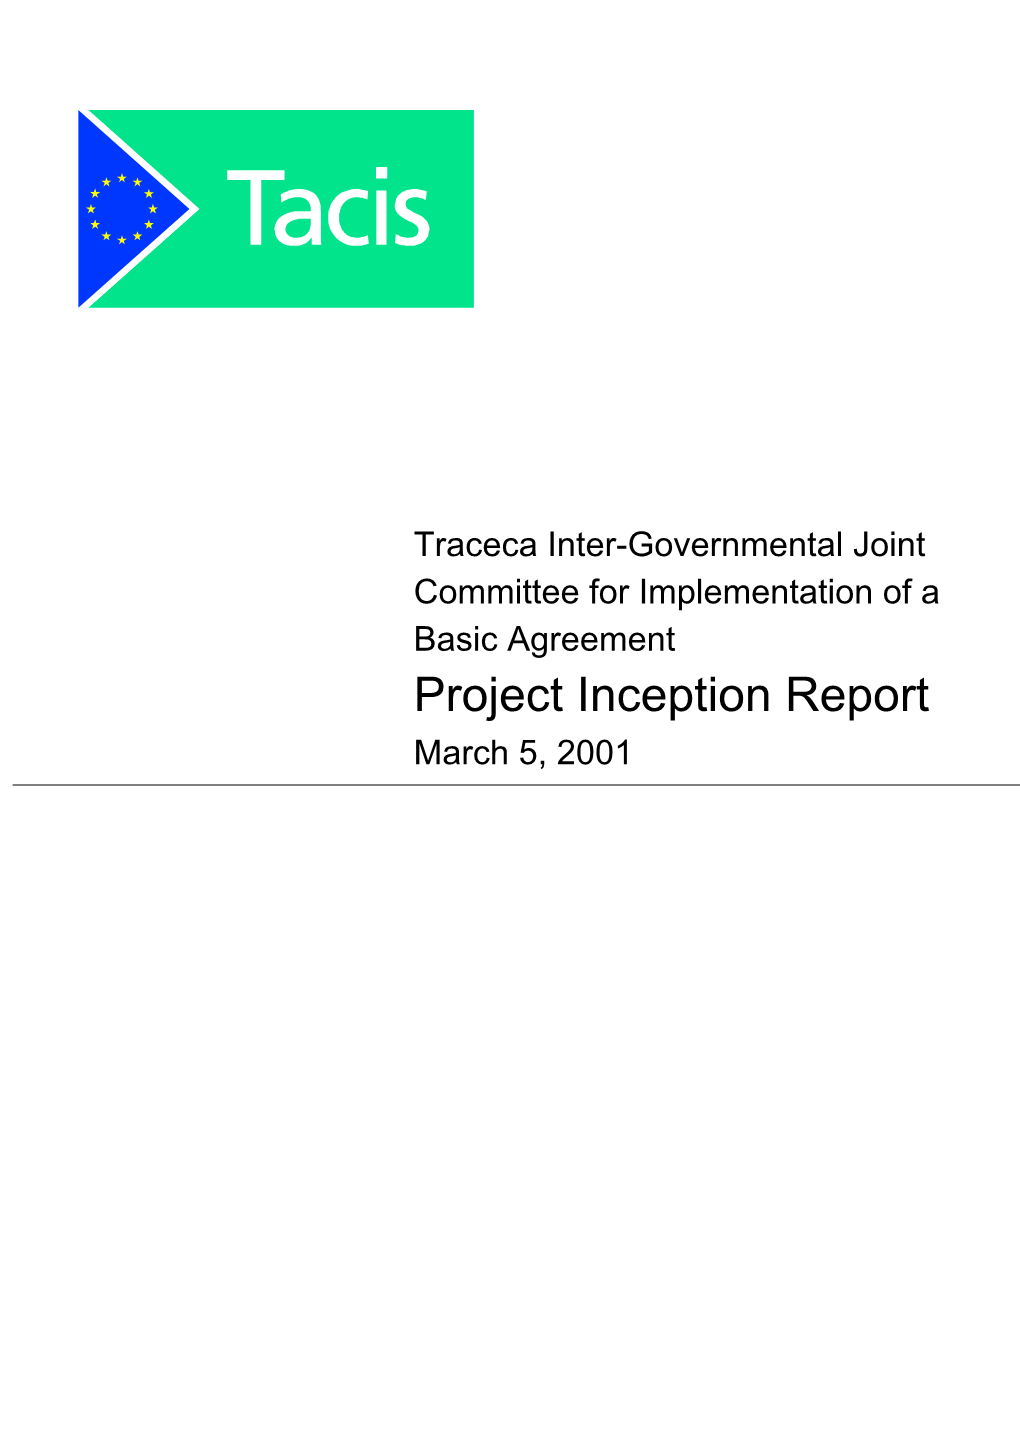 Project Inception Report March 5, 2001